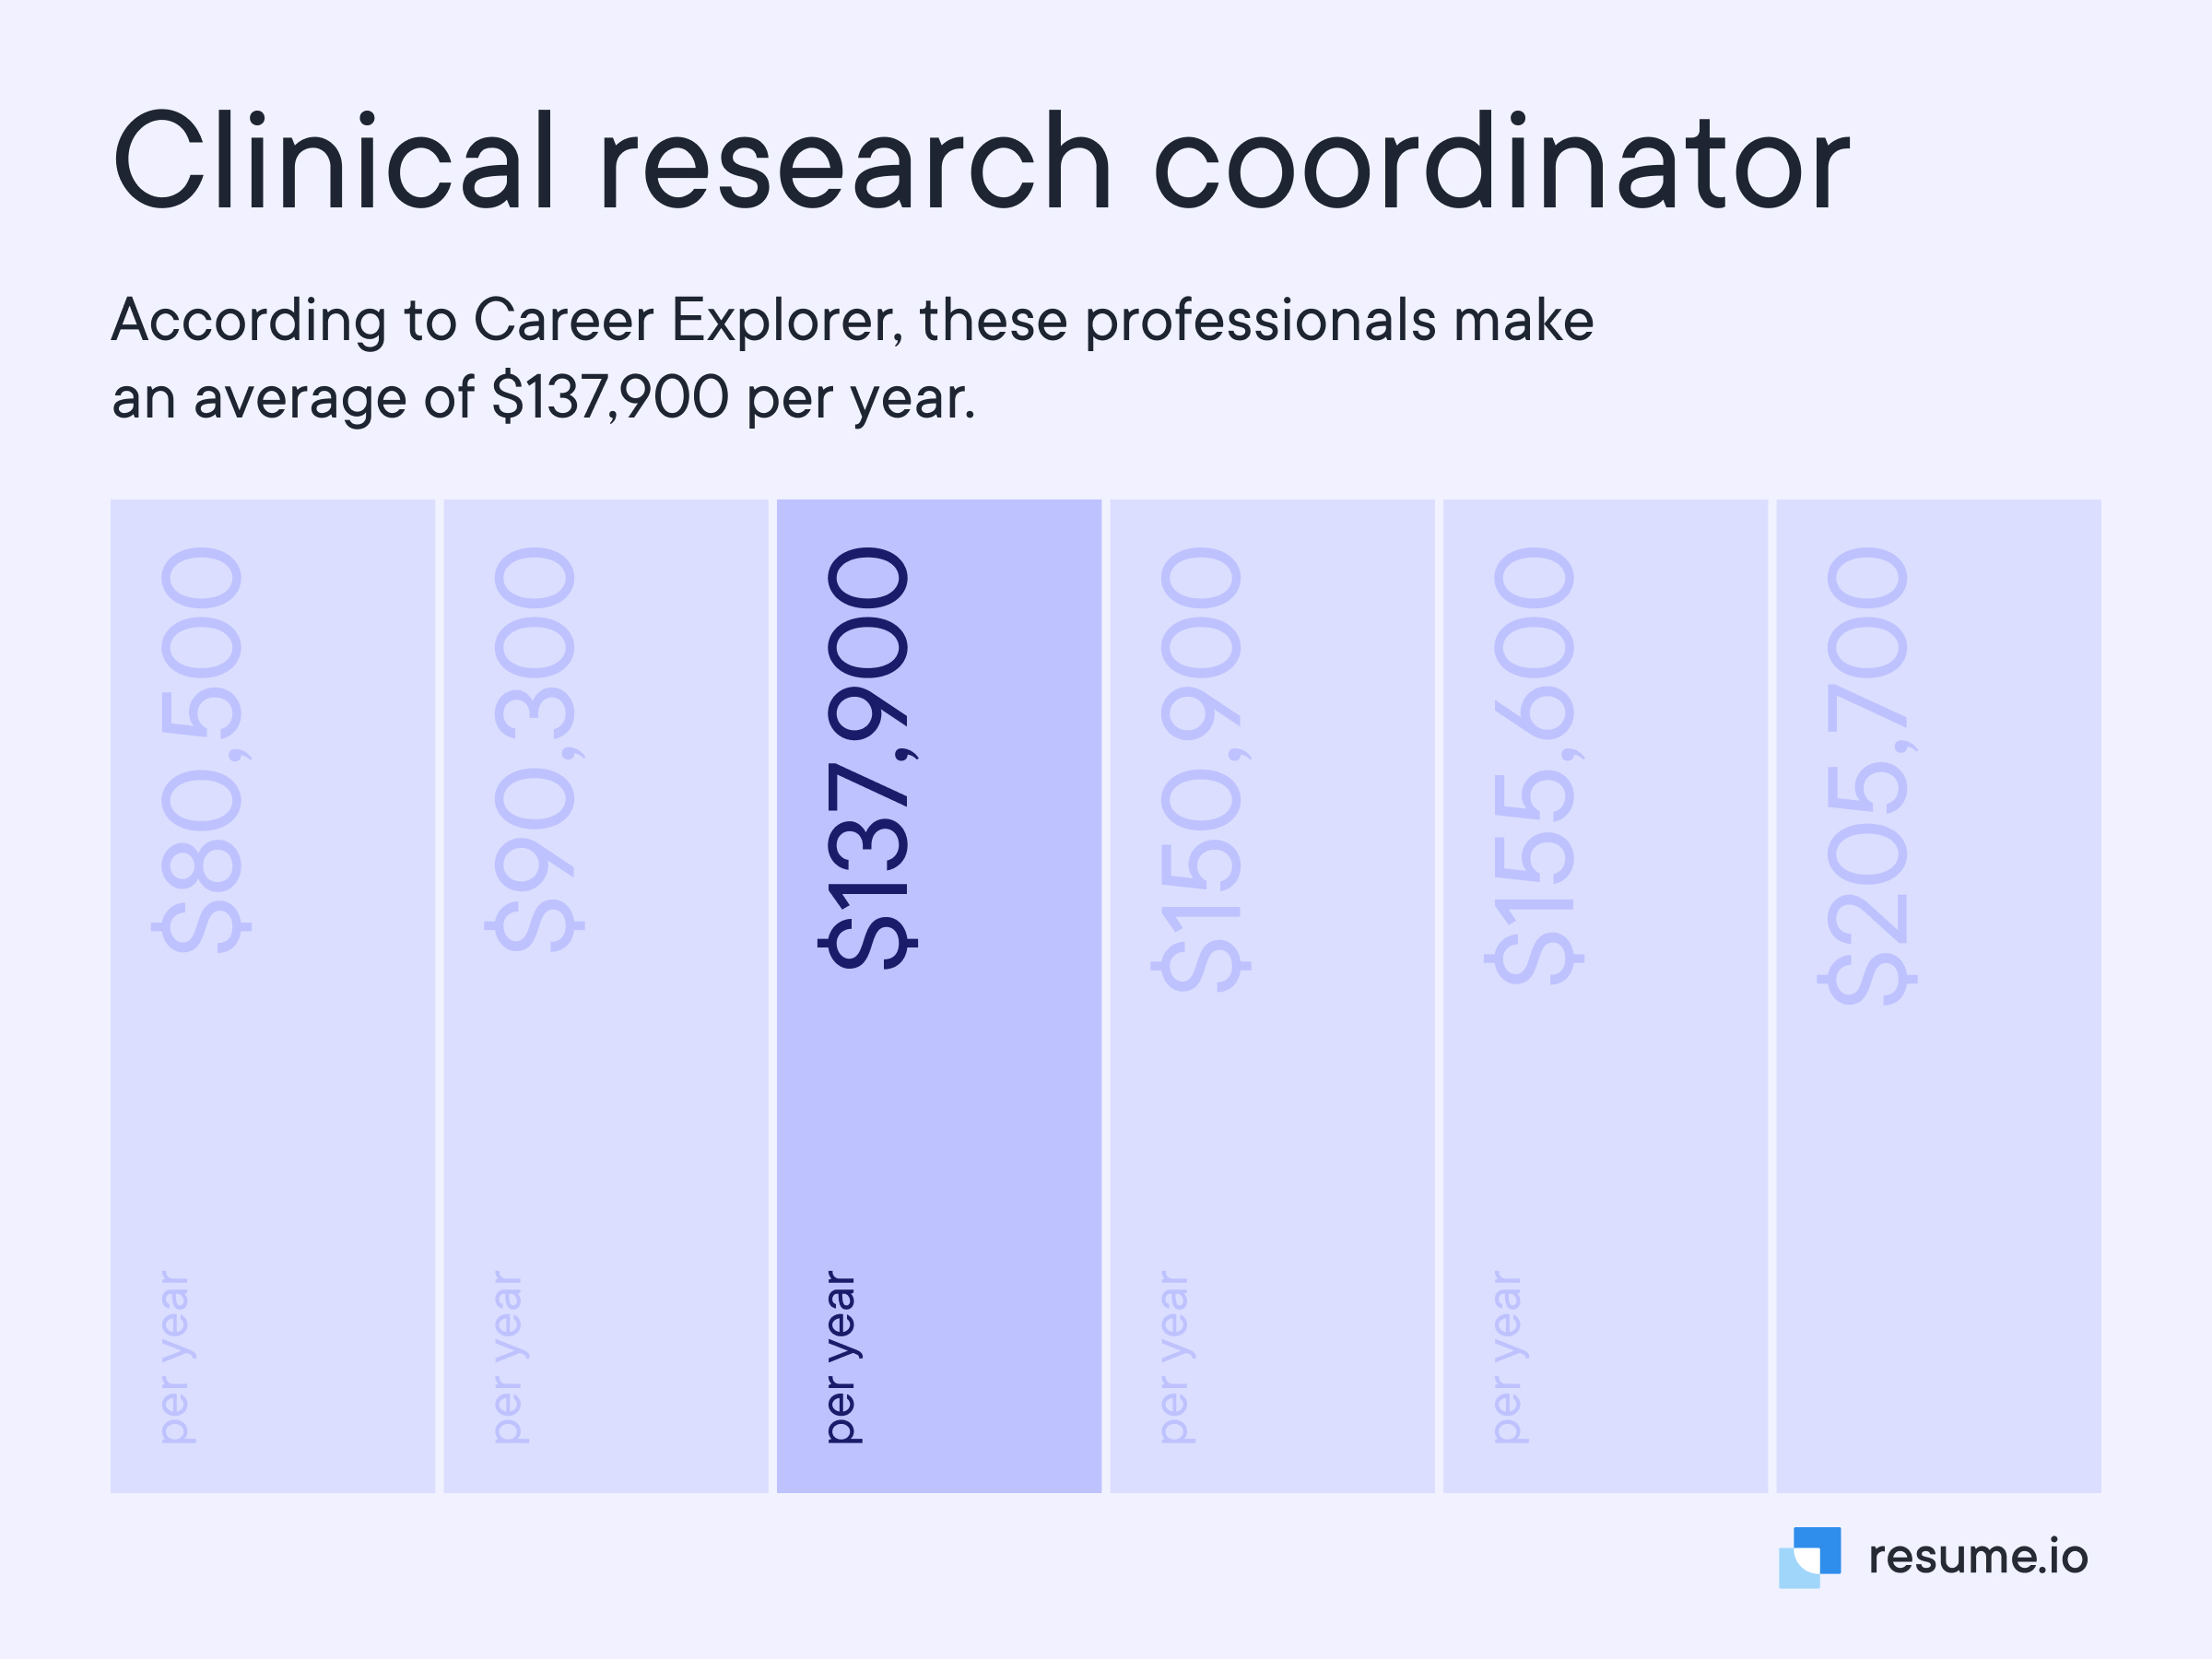 According to Career Explorer, Clinical research coordinators make an average of $137,900 per year